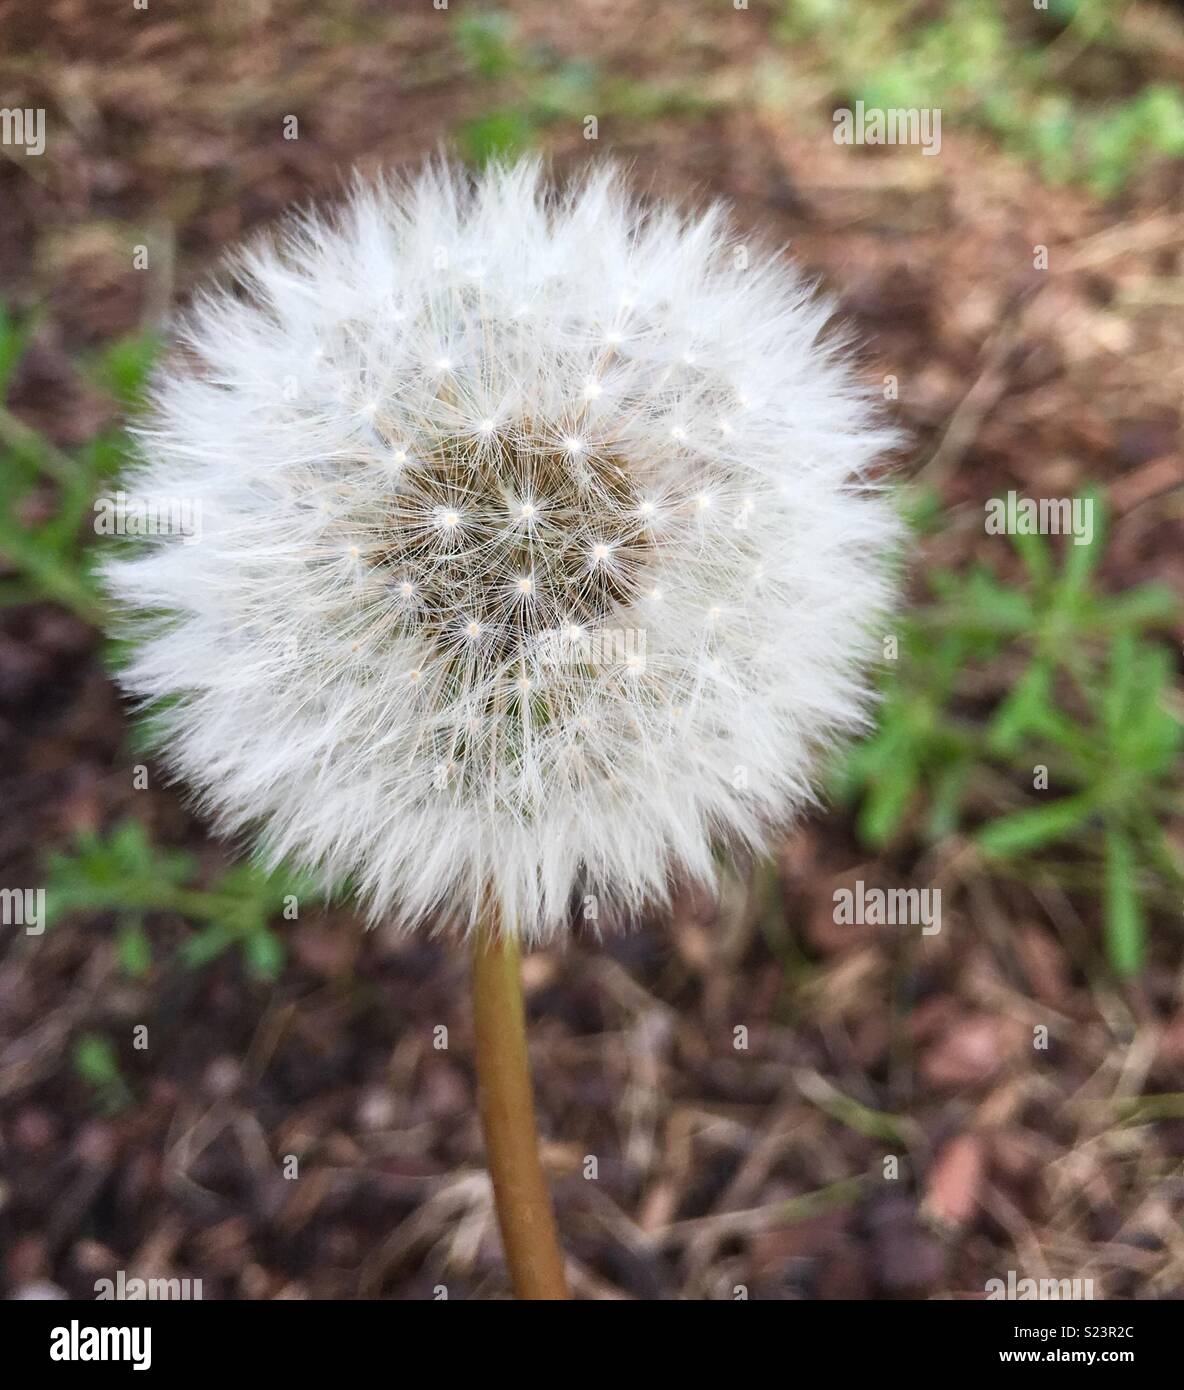 Dandelion seed head in natural environment. Stock Photo